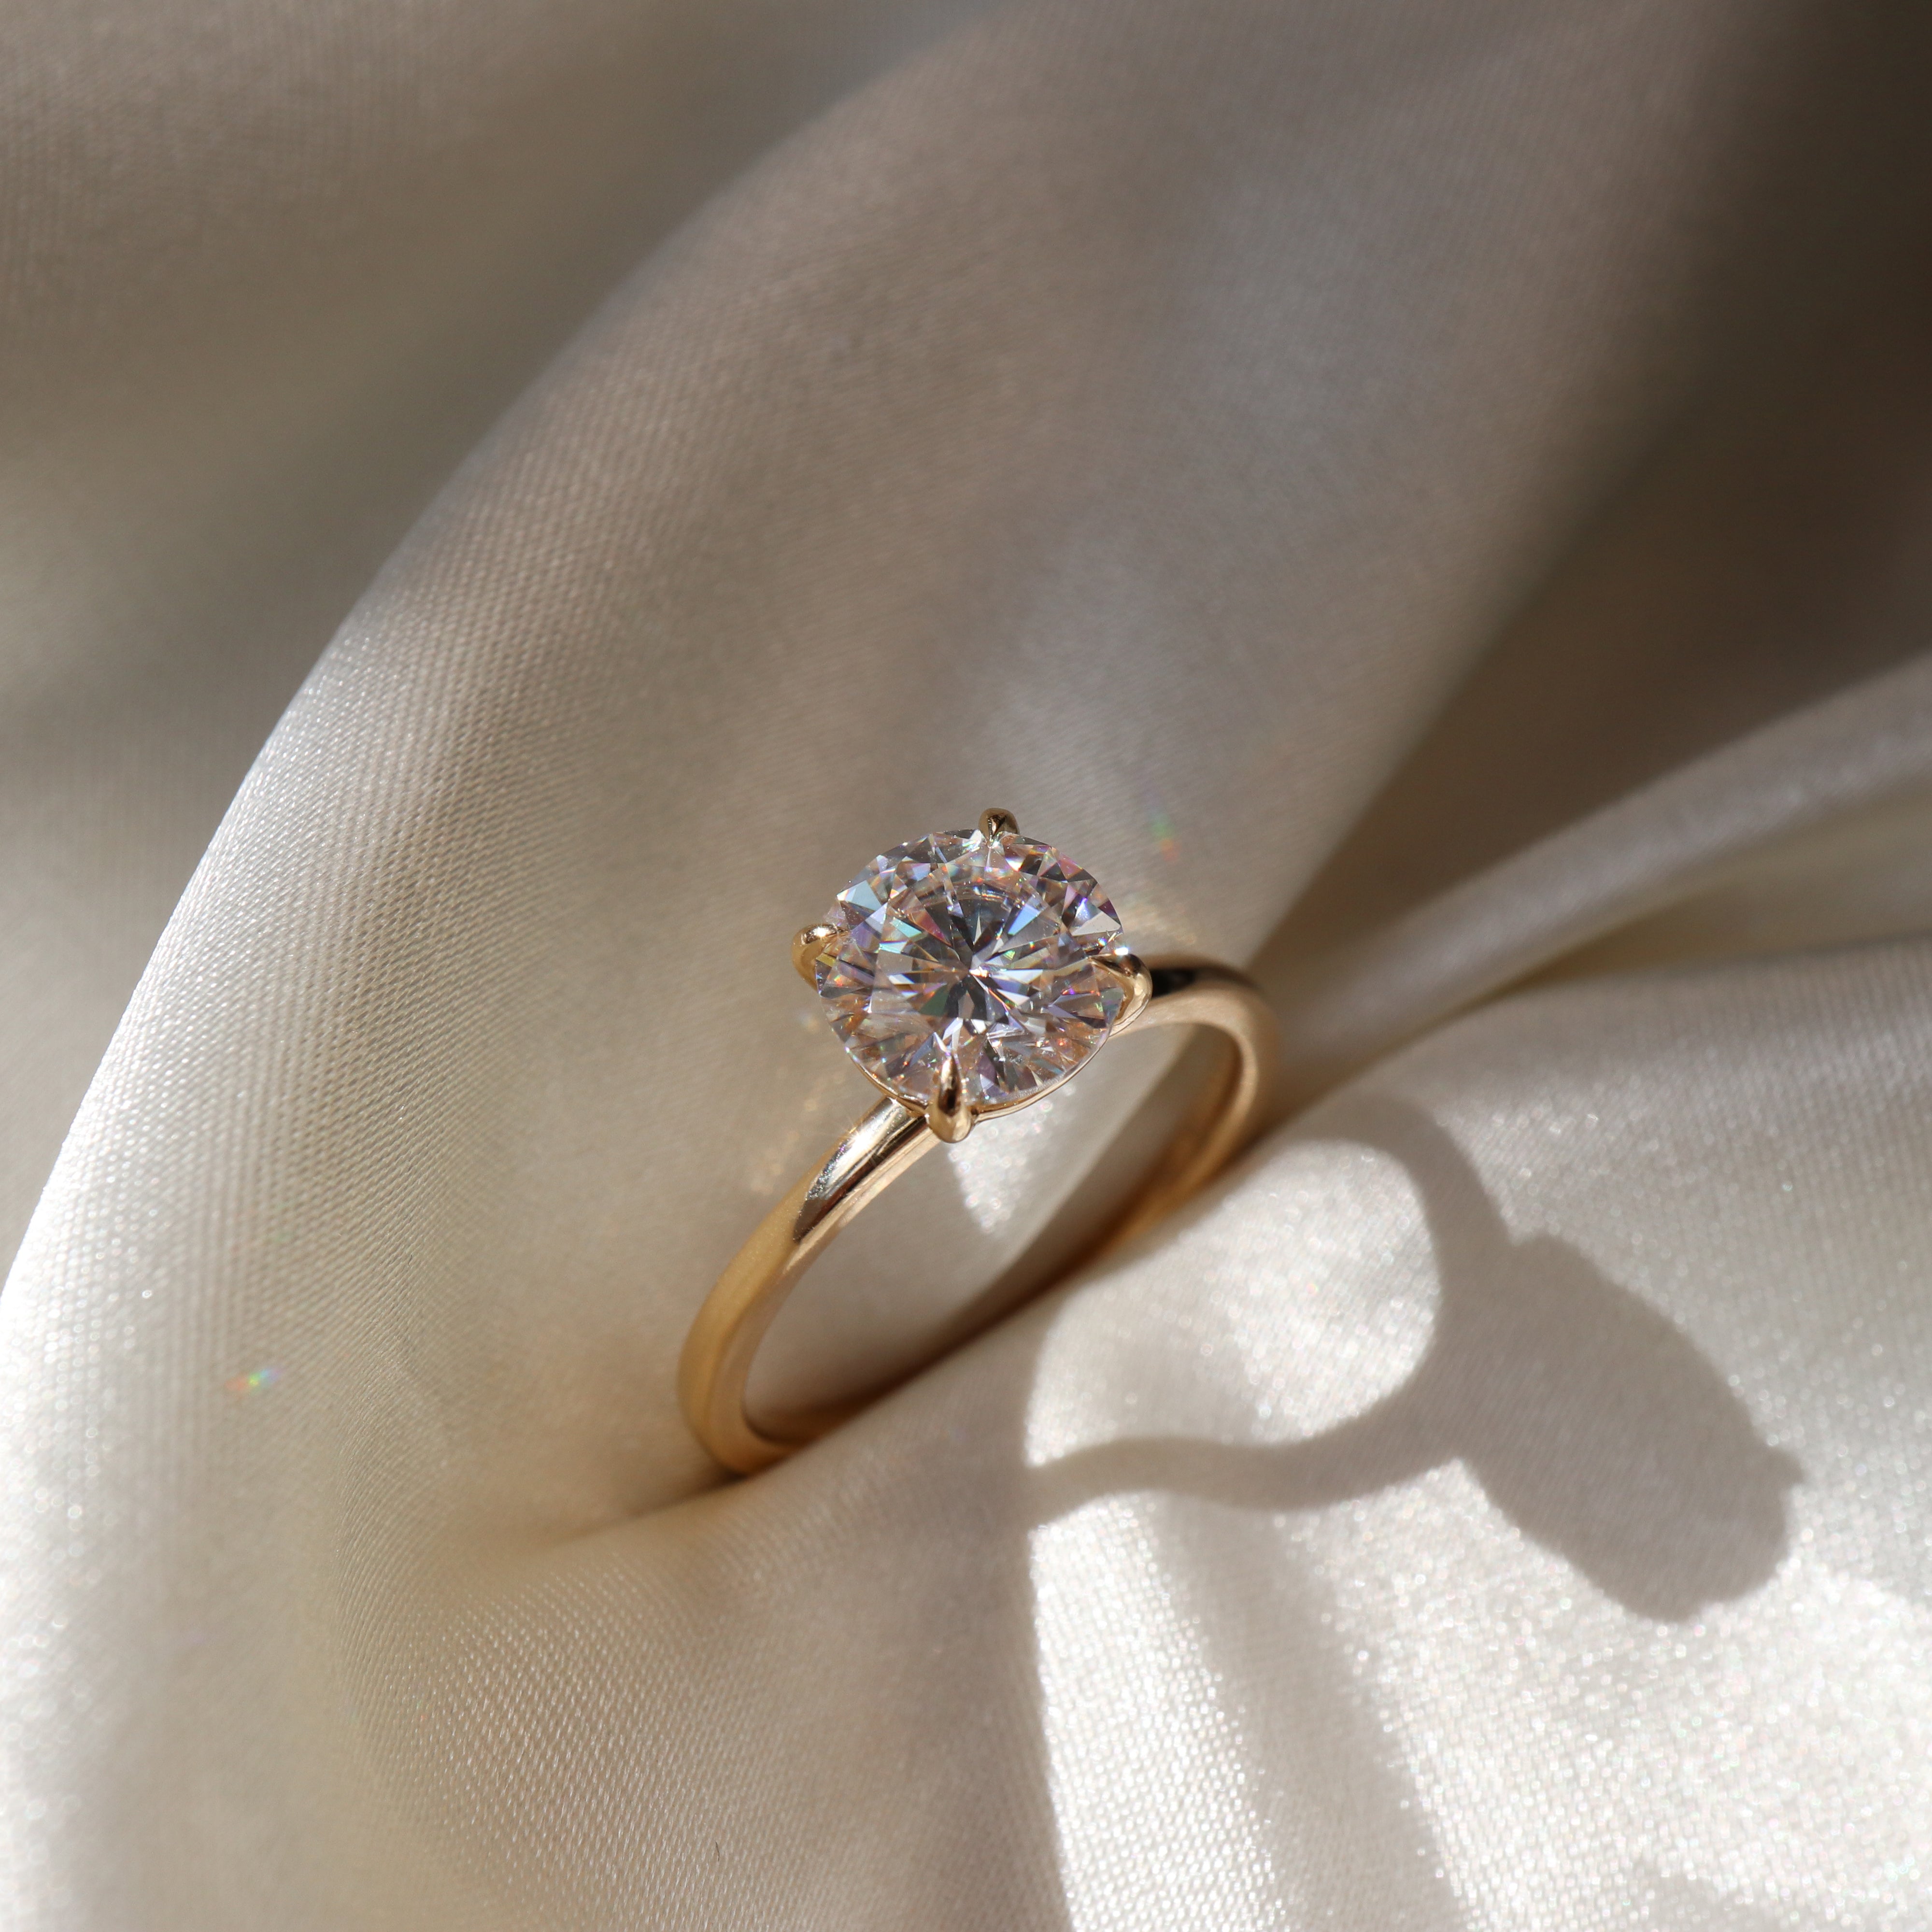 The Isla Ring - Round Solitaire